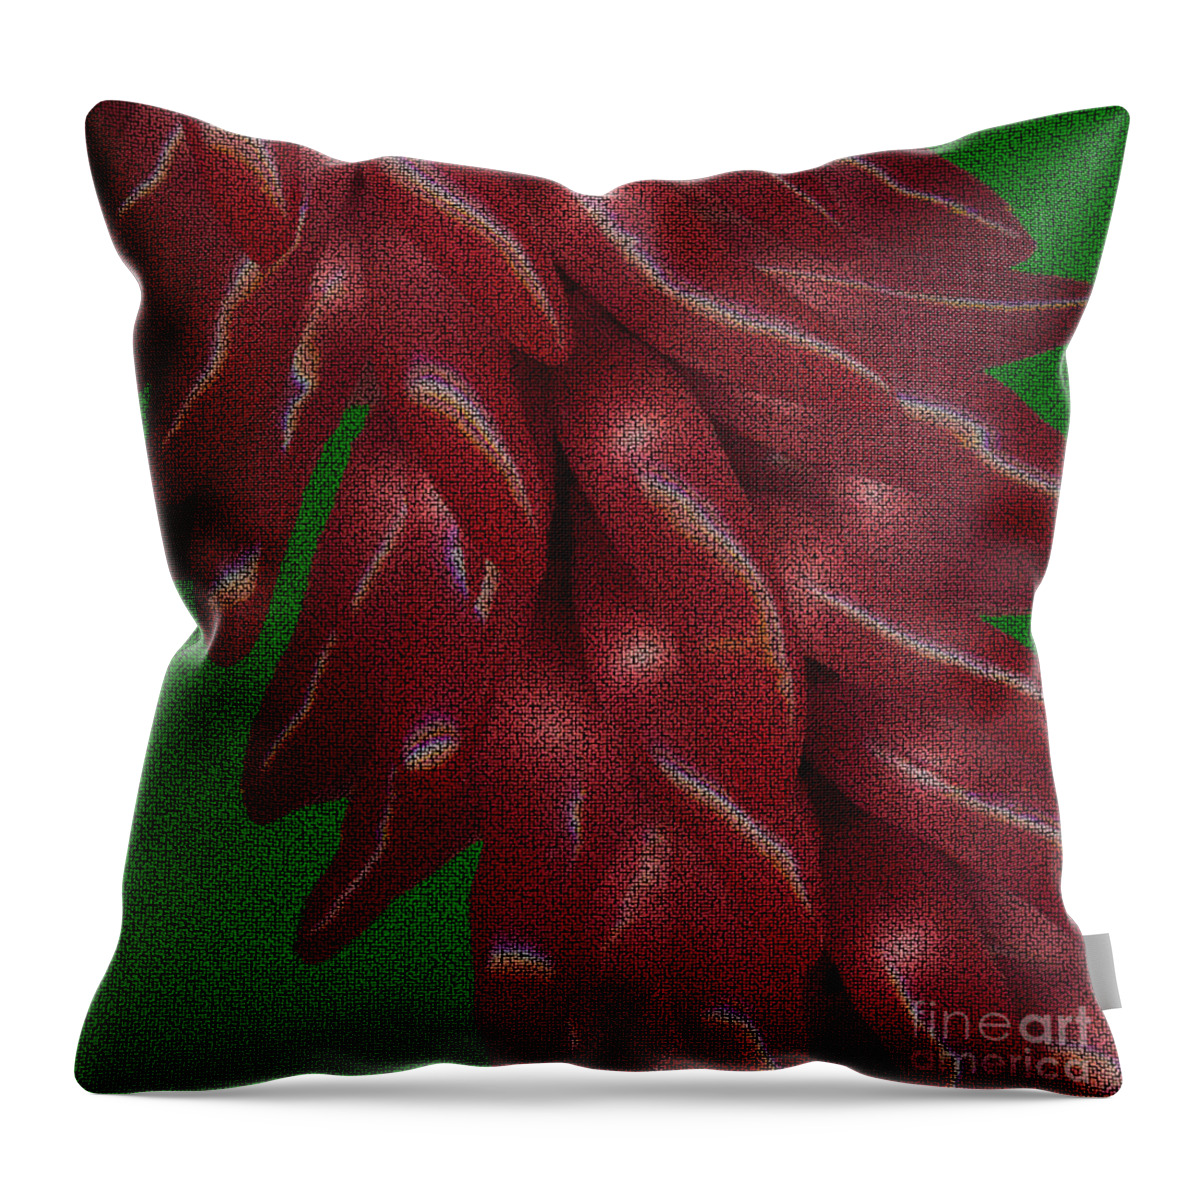 Pepper Throw Pillow featuring the photograph Mosaic Firey Peppers by Joseph Baril